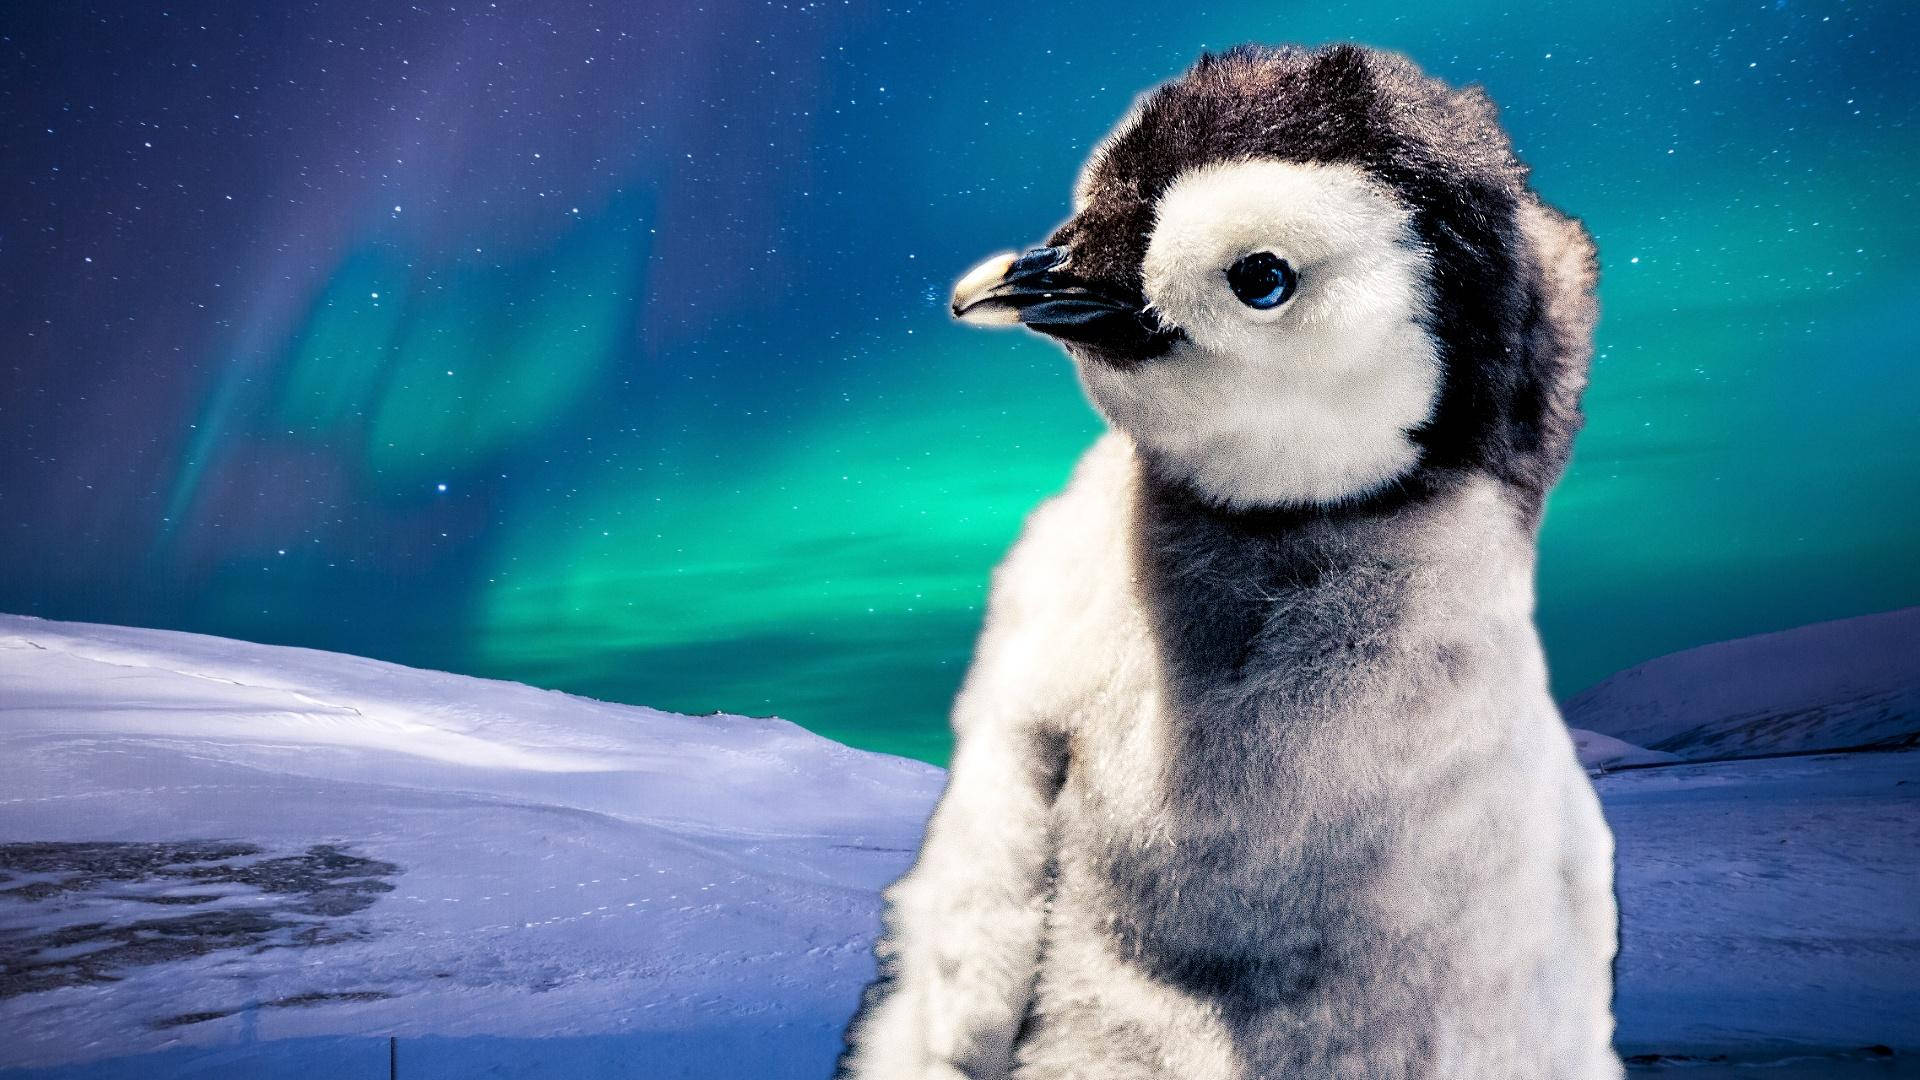 Baby Penguin And Northern Lights Wallpaper